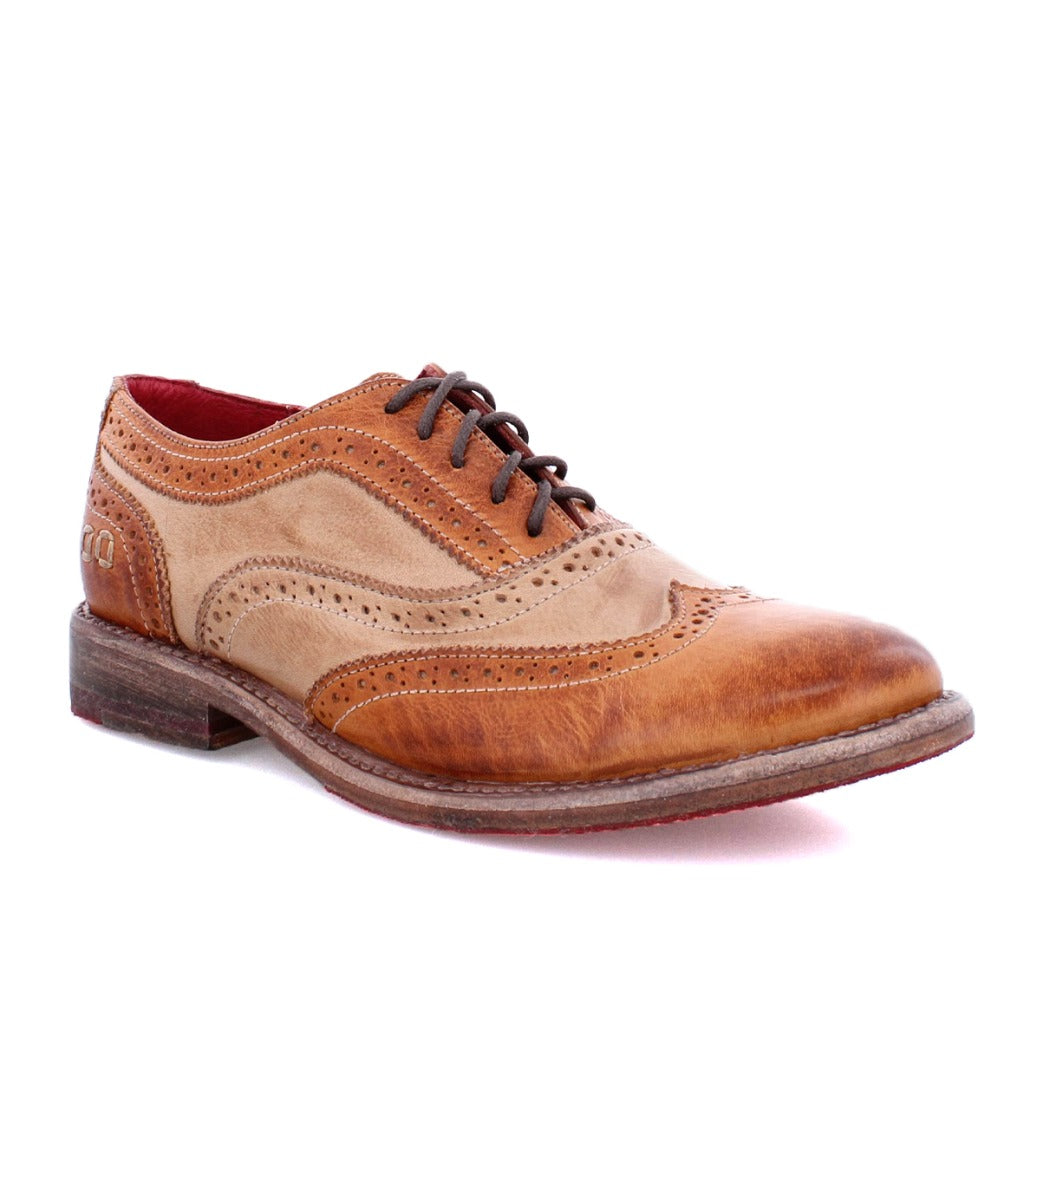 A tan and brown wingtip oxford shoe called "Lita" by Bed Stu.